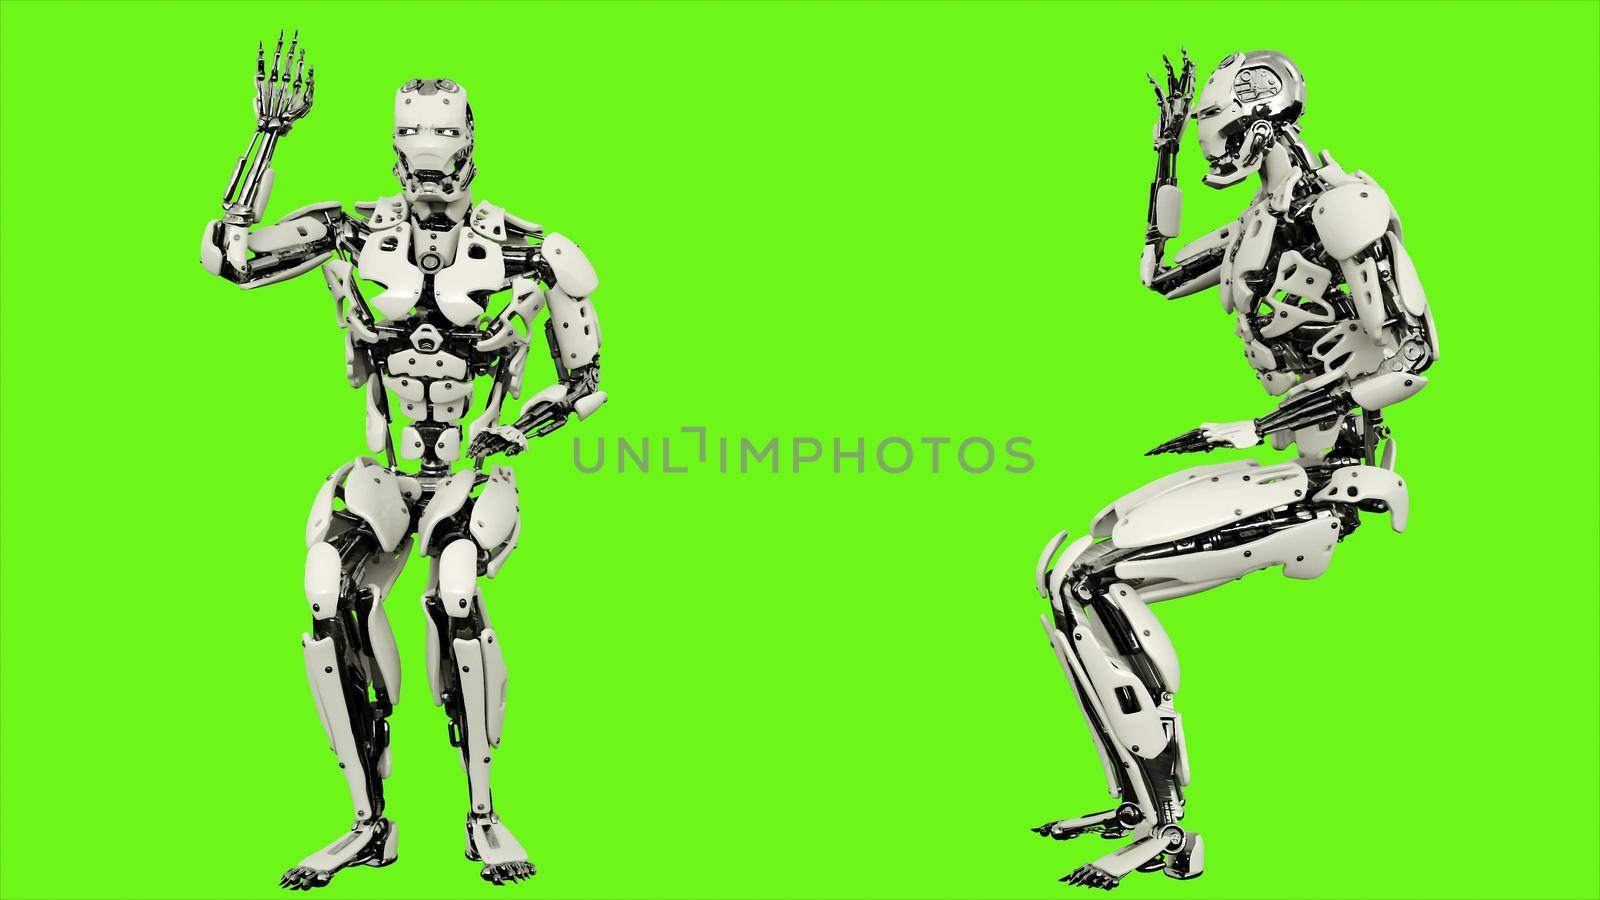 Robot android is asking question. Illustration on green screen background.